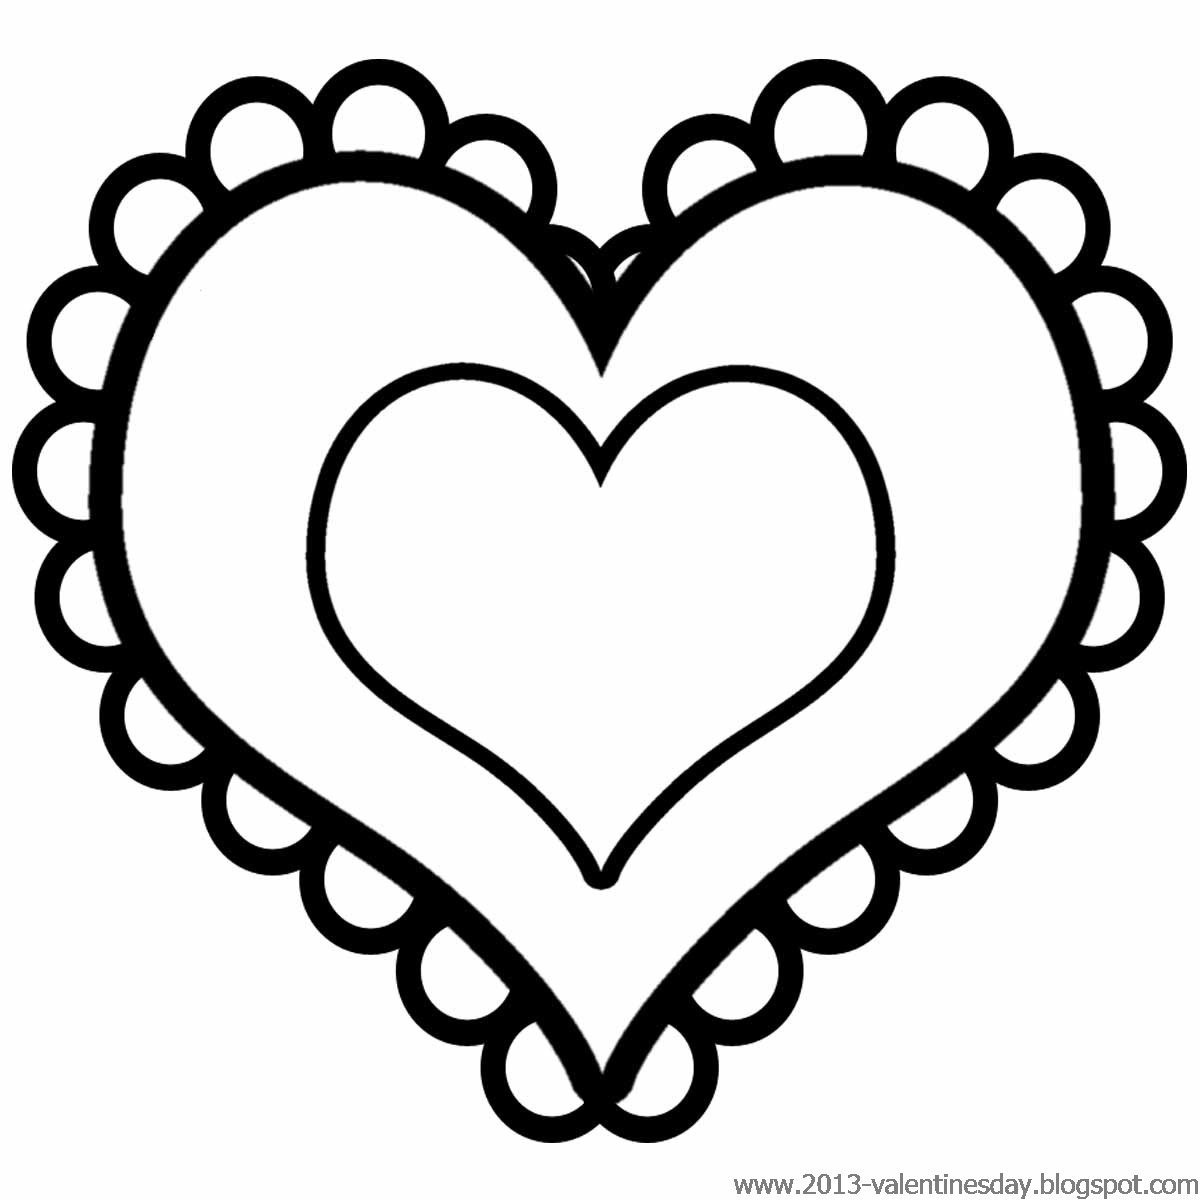 Heart Clipart Black And White - free clipart downloading - teddy bear with heart clipart, red heart clip art, rainbow heart clipart, purple heart clip art, peace sign heart clip art, love heart clipart, heart shaped clip art, heart line clip art, heart jpg clipart, heart in hand clipart, heart hands clipart, heart disease clipart, free heart clipart black and white, free clip art hearts and flowers, free clip art heart, floral heart clipart, double heart clip art, decorative heart clipart, clip art heart black and white, art-works for free